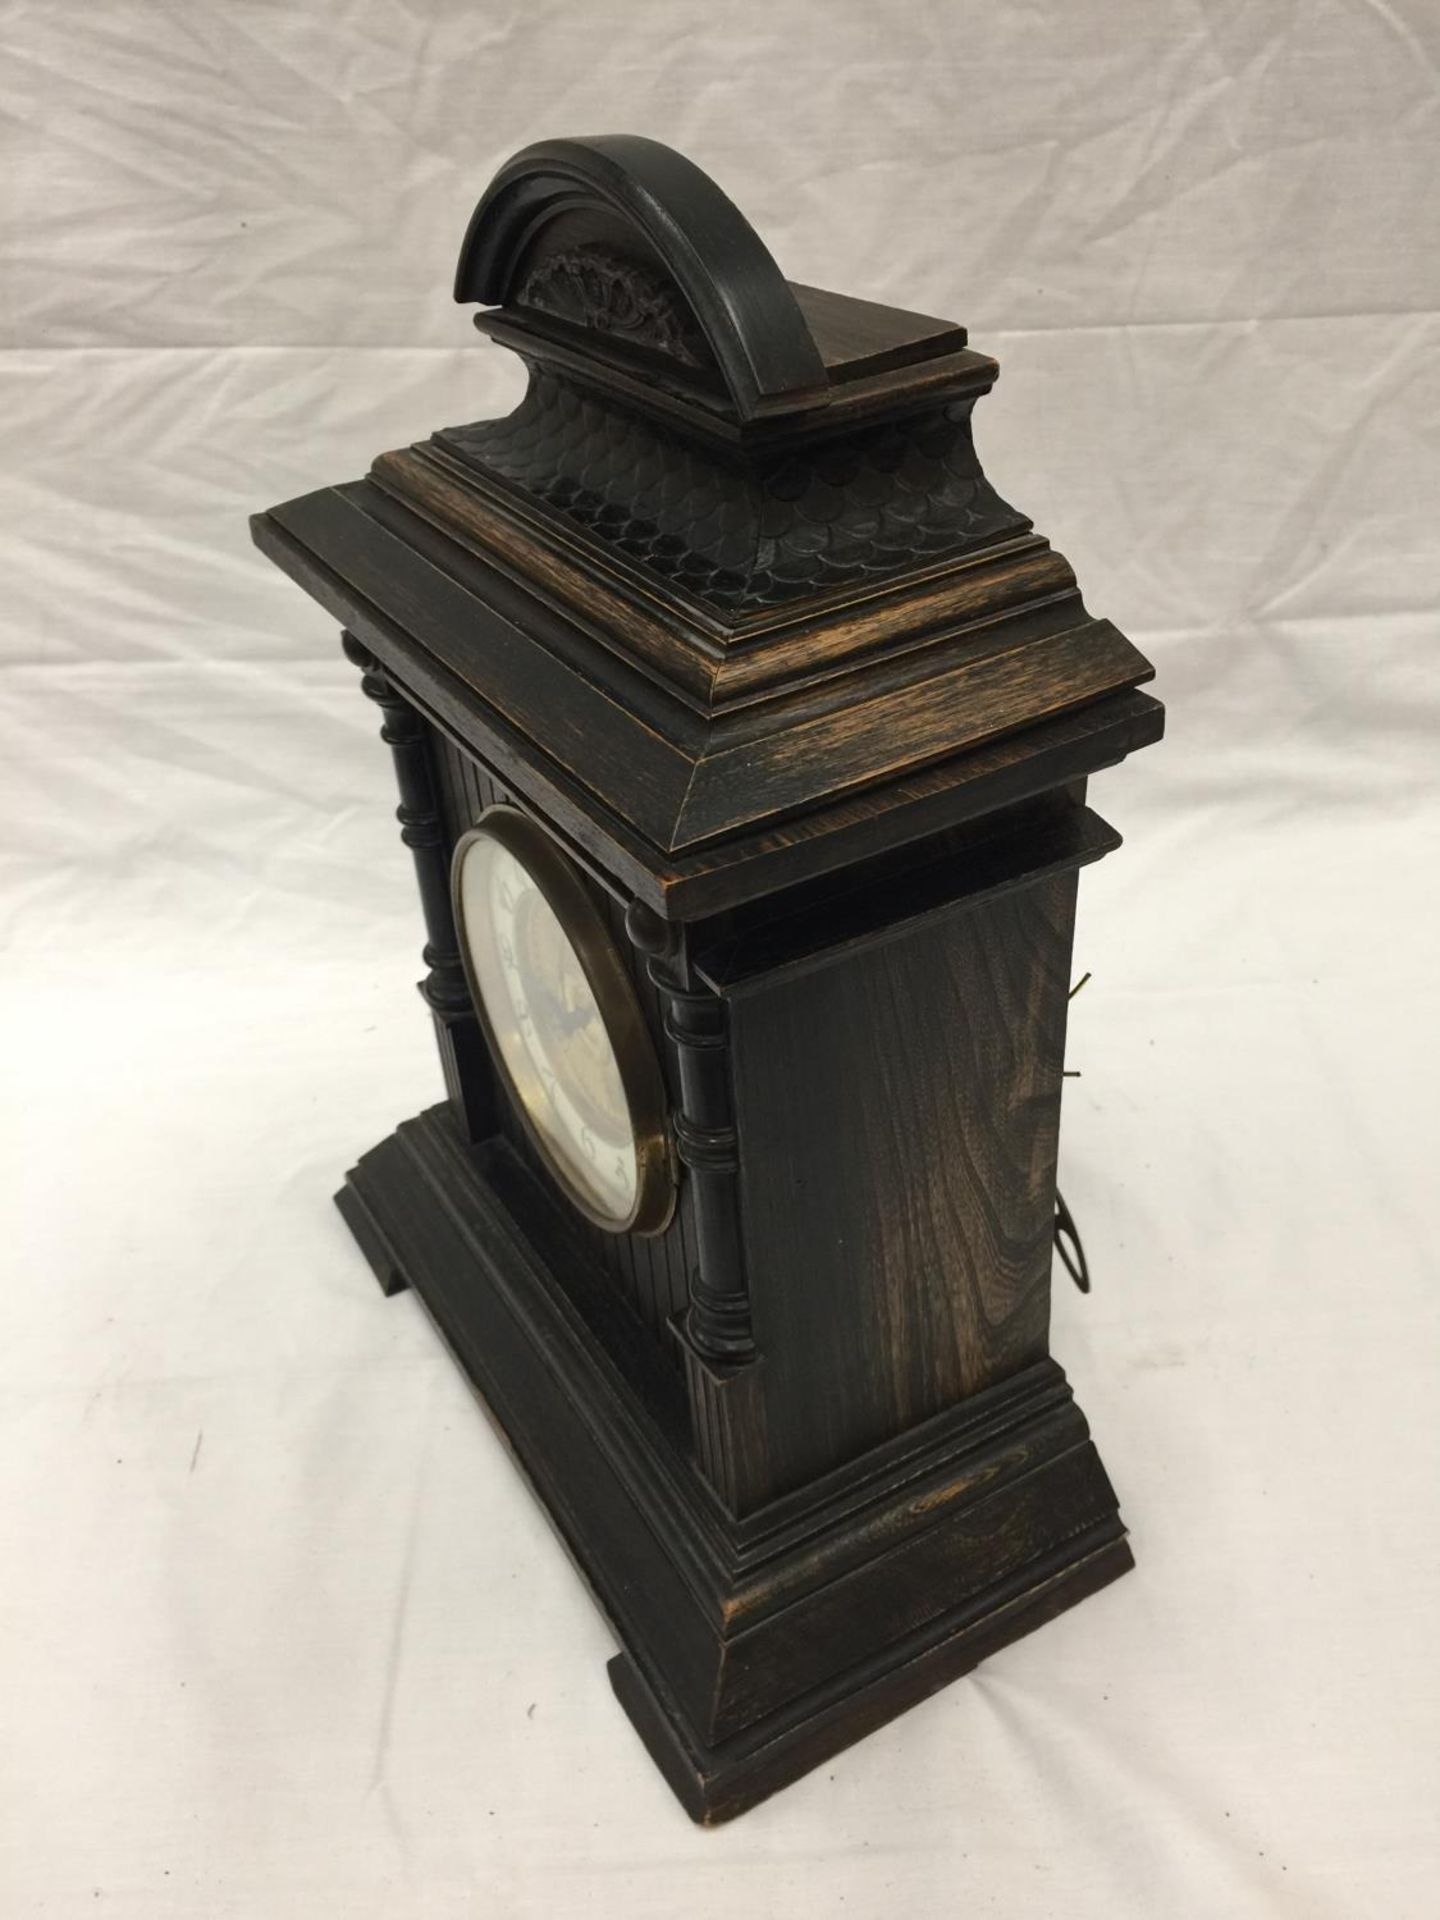 AN ORNATE CHIMING MANTLE CLOCK WITH GERMAN MOVEMENT AND PENDULUM. KEY IS PRESENT AND WORKING AT TIME - Image 4 of 11